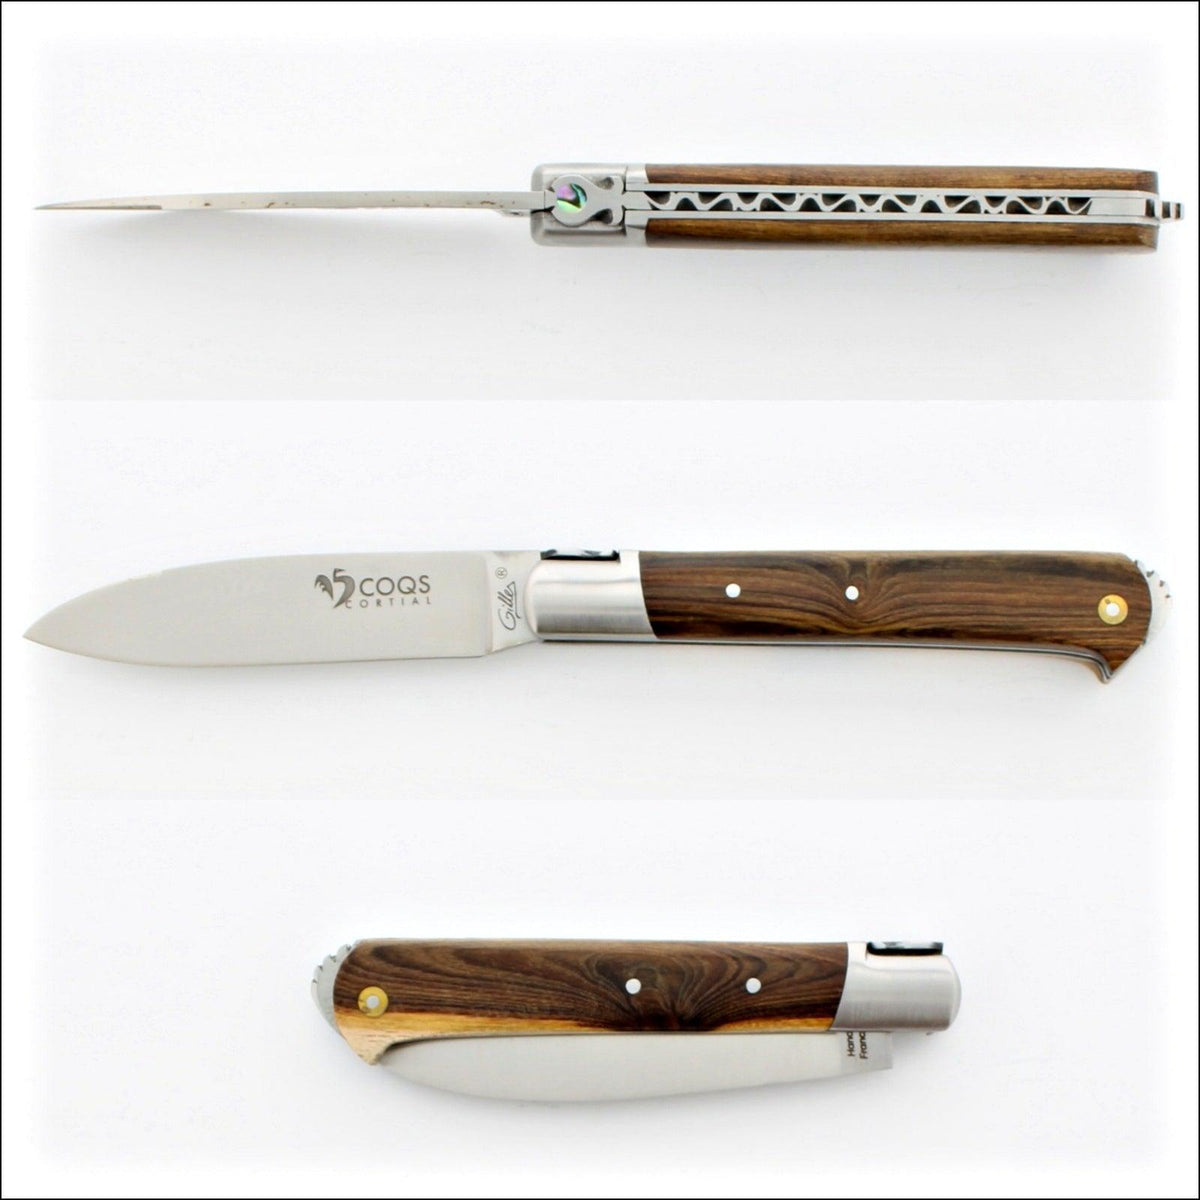 5 Coqs Pocket Knife - Pistachio wood &amp; Mother of Pearl Inlay